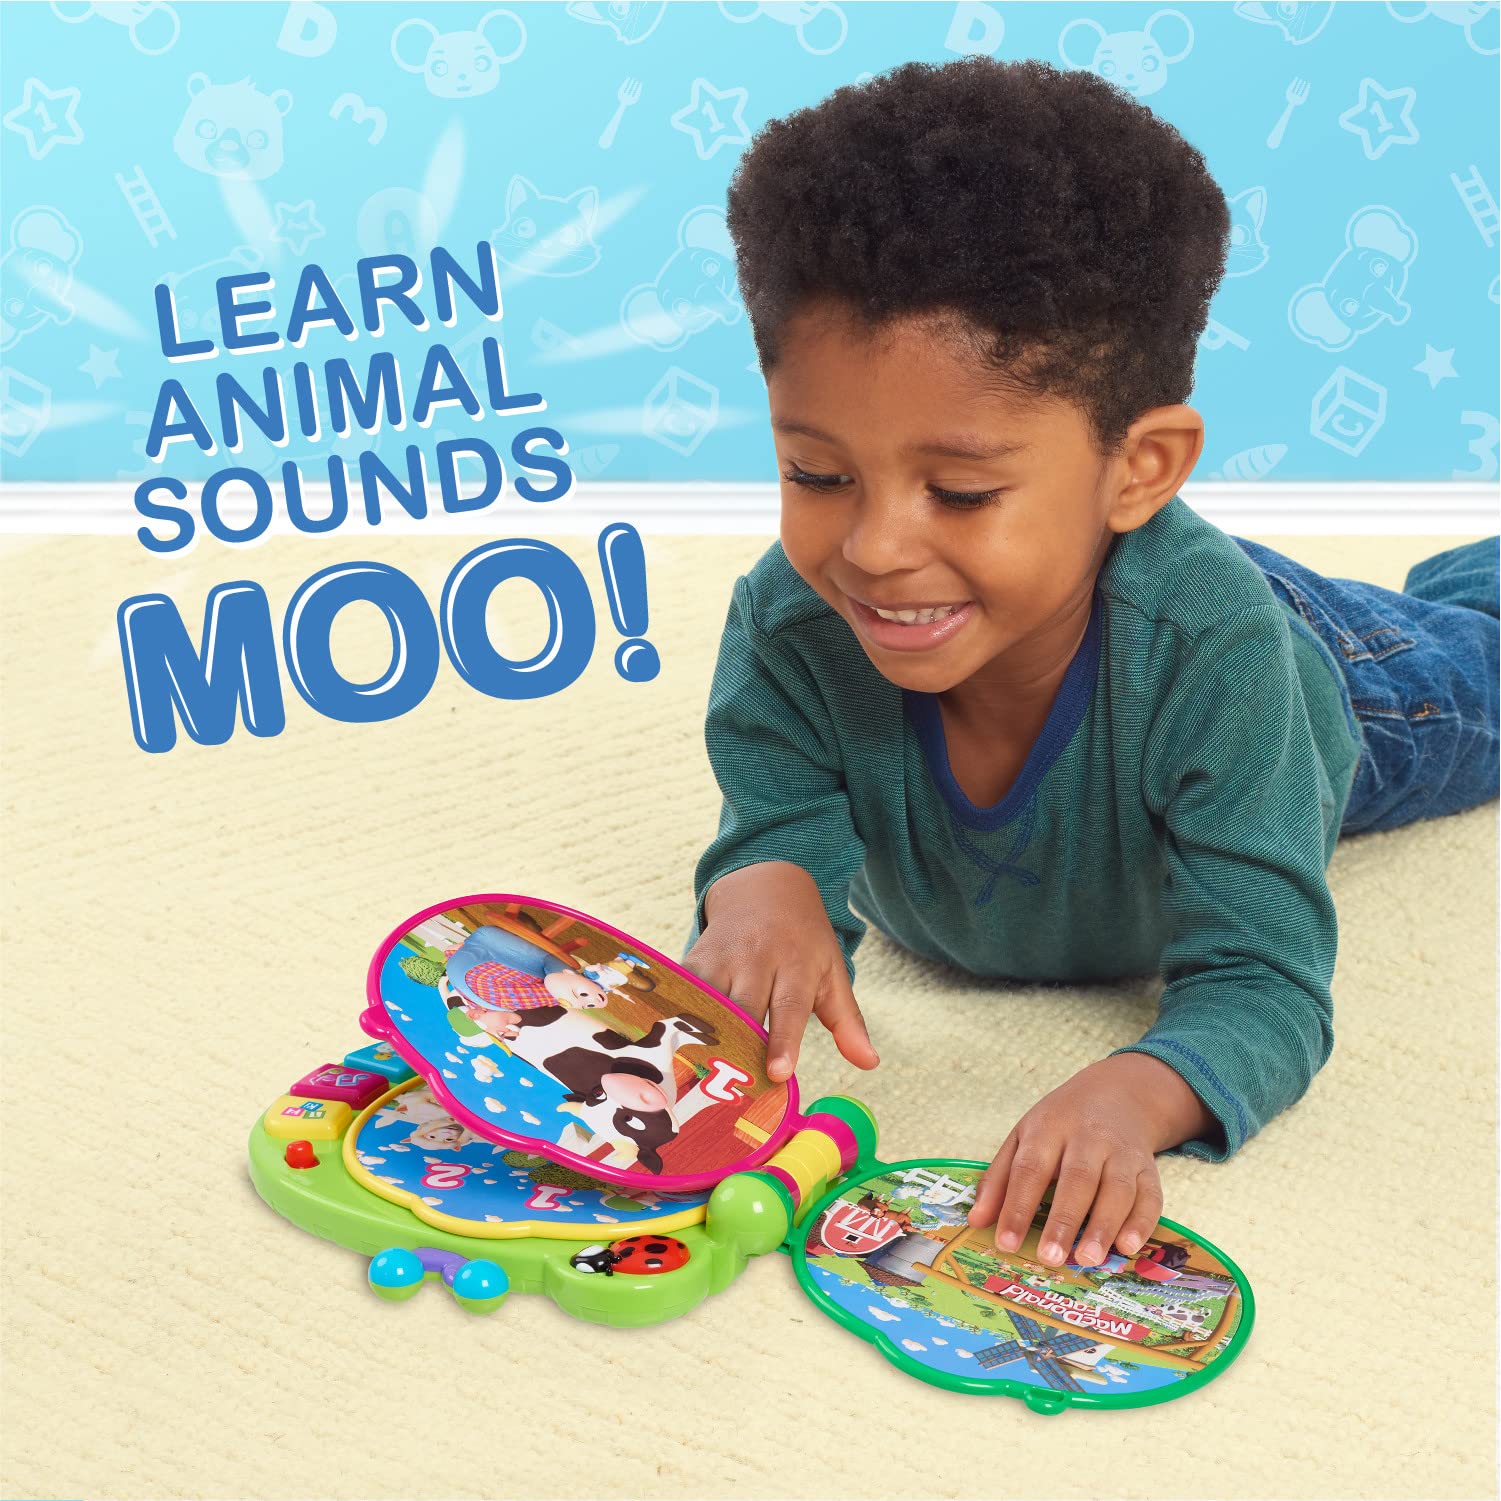 CoComelon Learning Book Interactive Toy for Toddlers with 3 Learning Modes, Music, 50 Learning Phrases, Officially Licensed Kids Toys for Ages 18 Month by Just Play